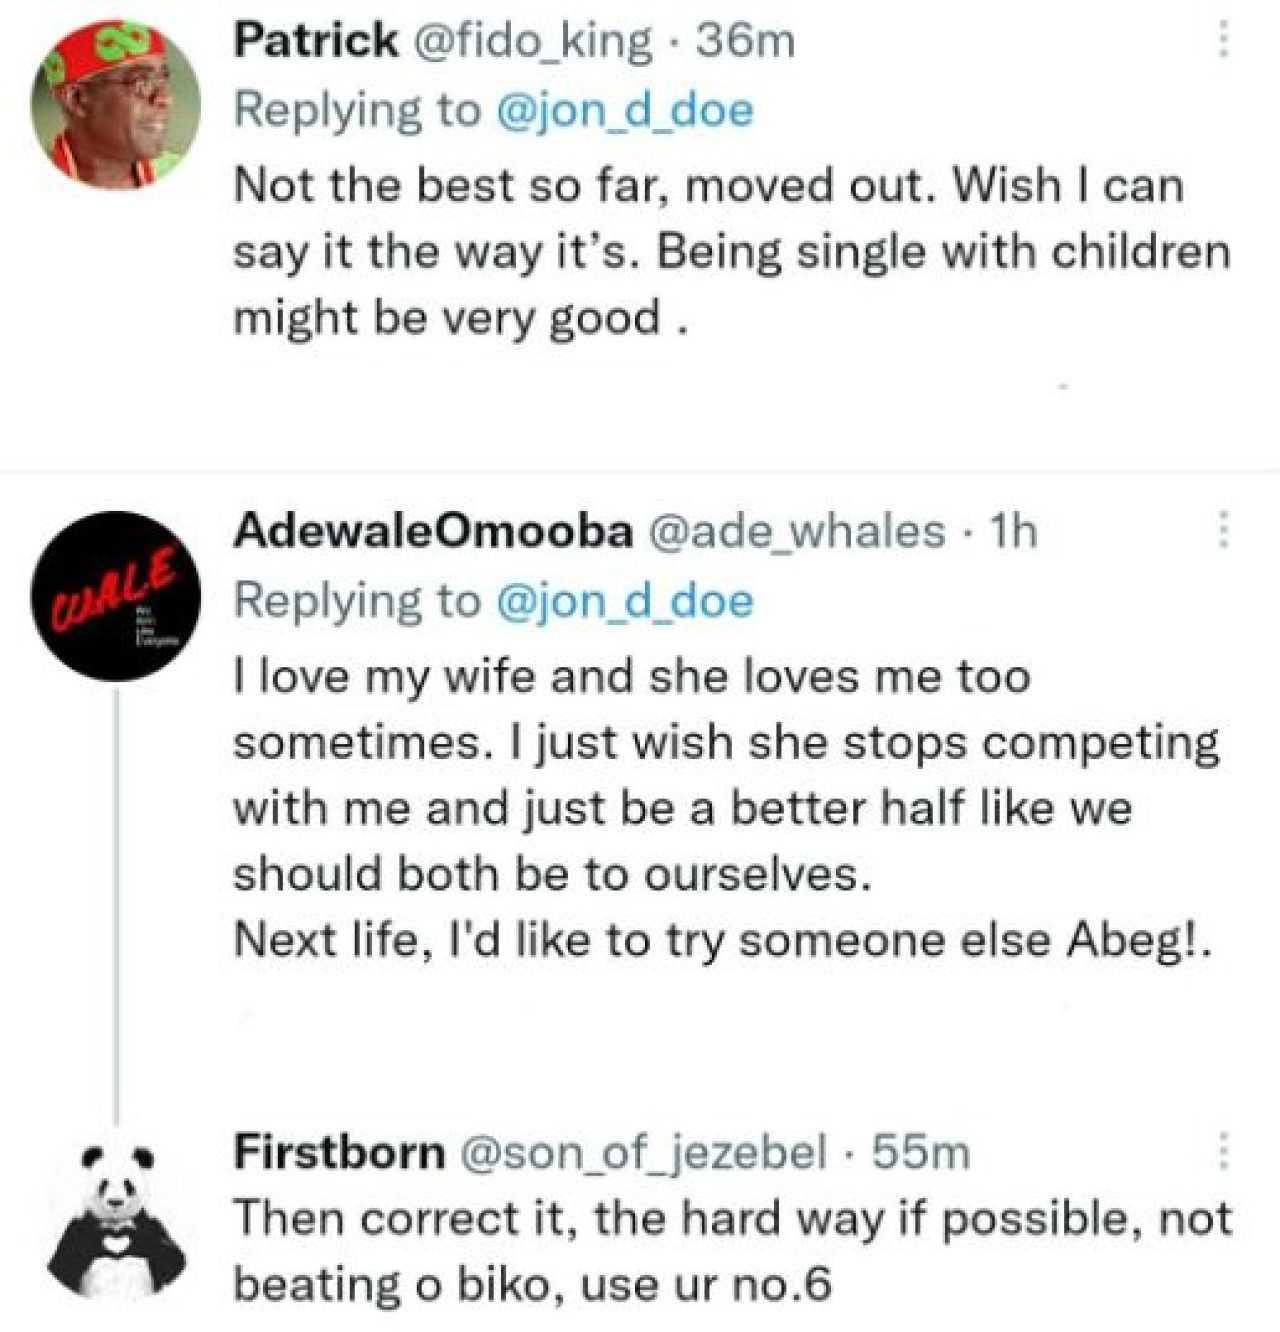 ''If you come back to this world, will you love to be married again and to the same partner?'' - Nigerians react. AdvertAfrica News on afronewswire.com: Amplifying Africa's Voice | afronewswire.com | Breaking News & Stories